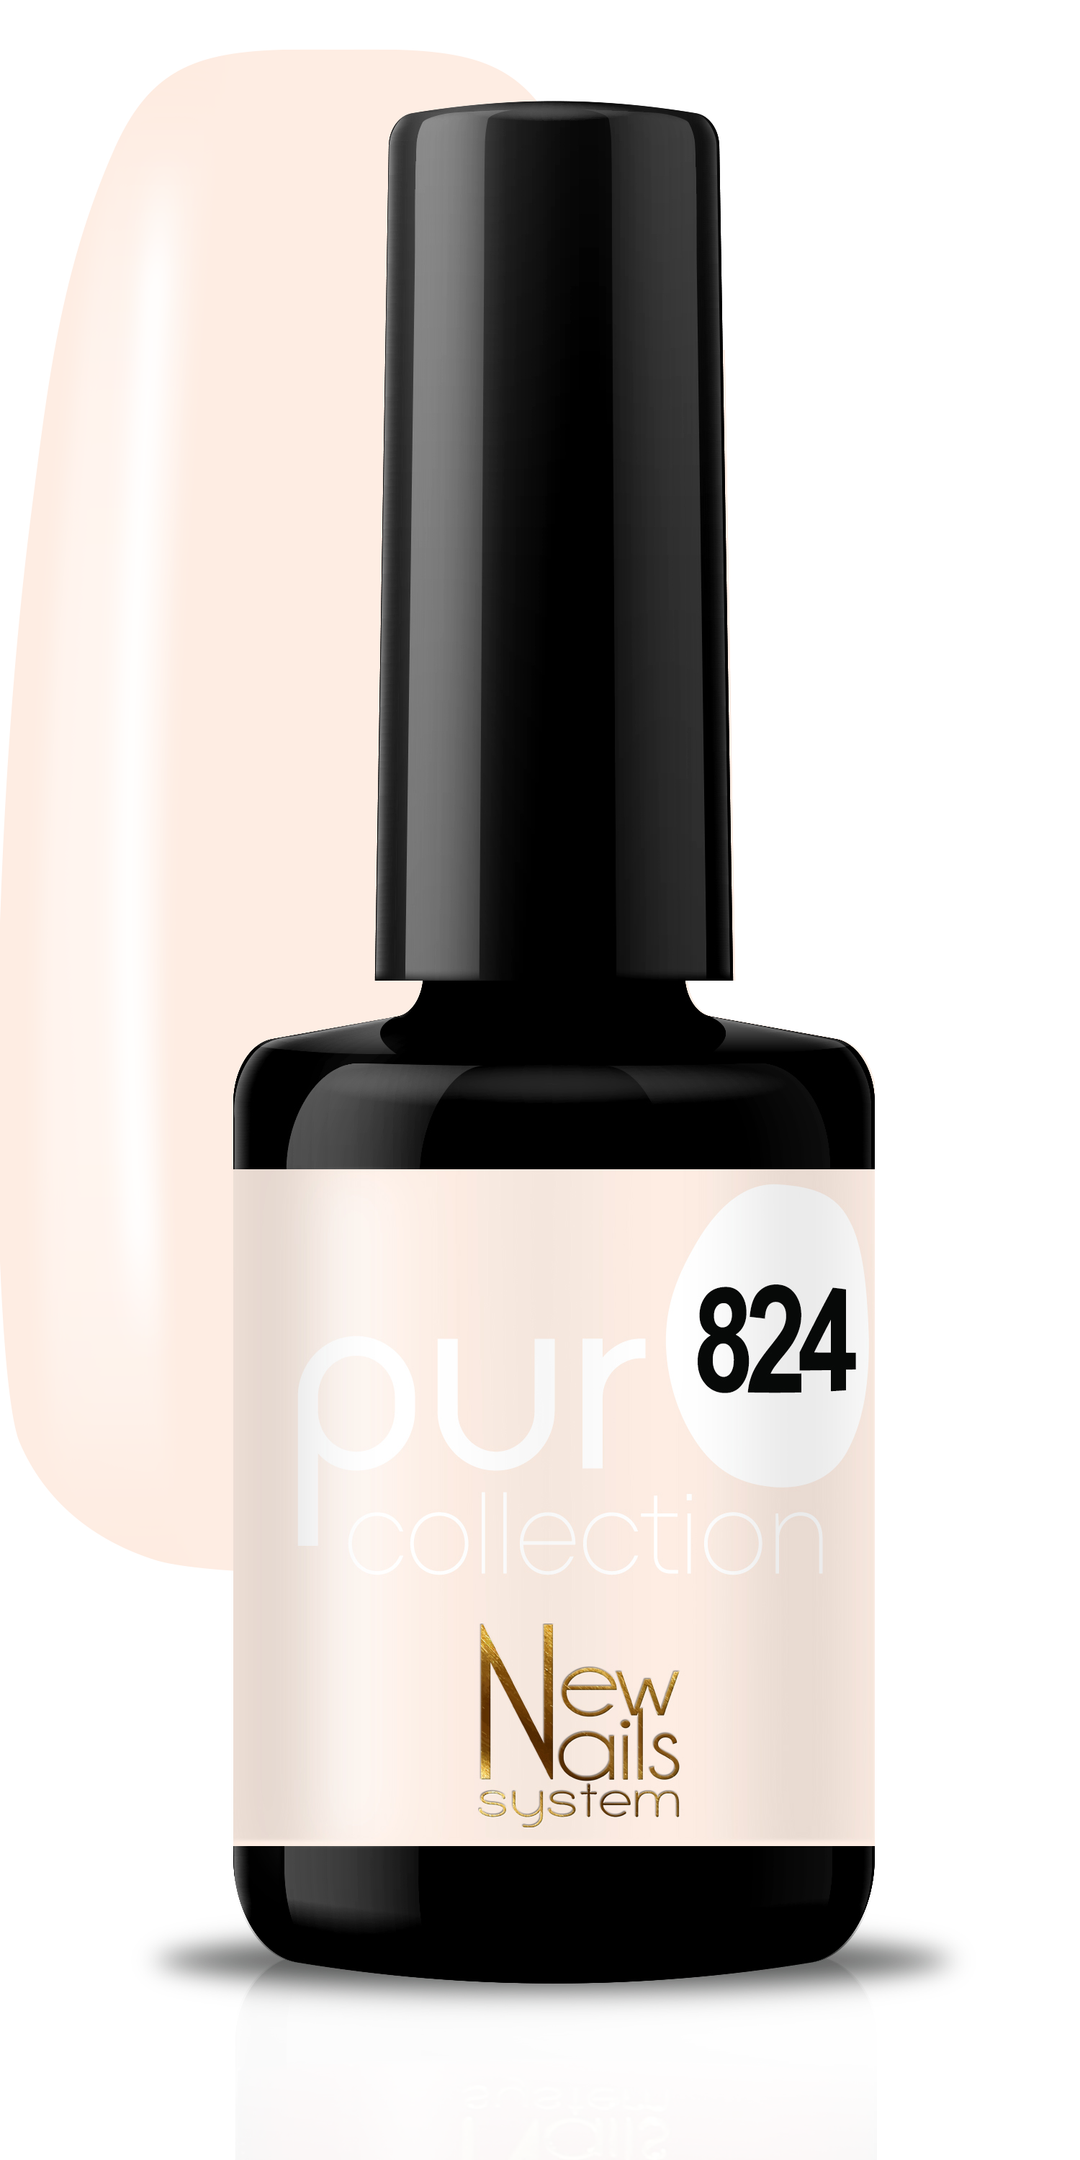 Puro collection Scent of Roses 824 gel polish color 5ml